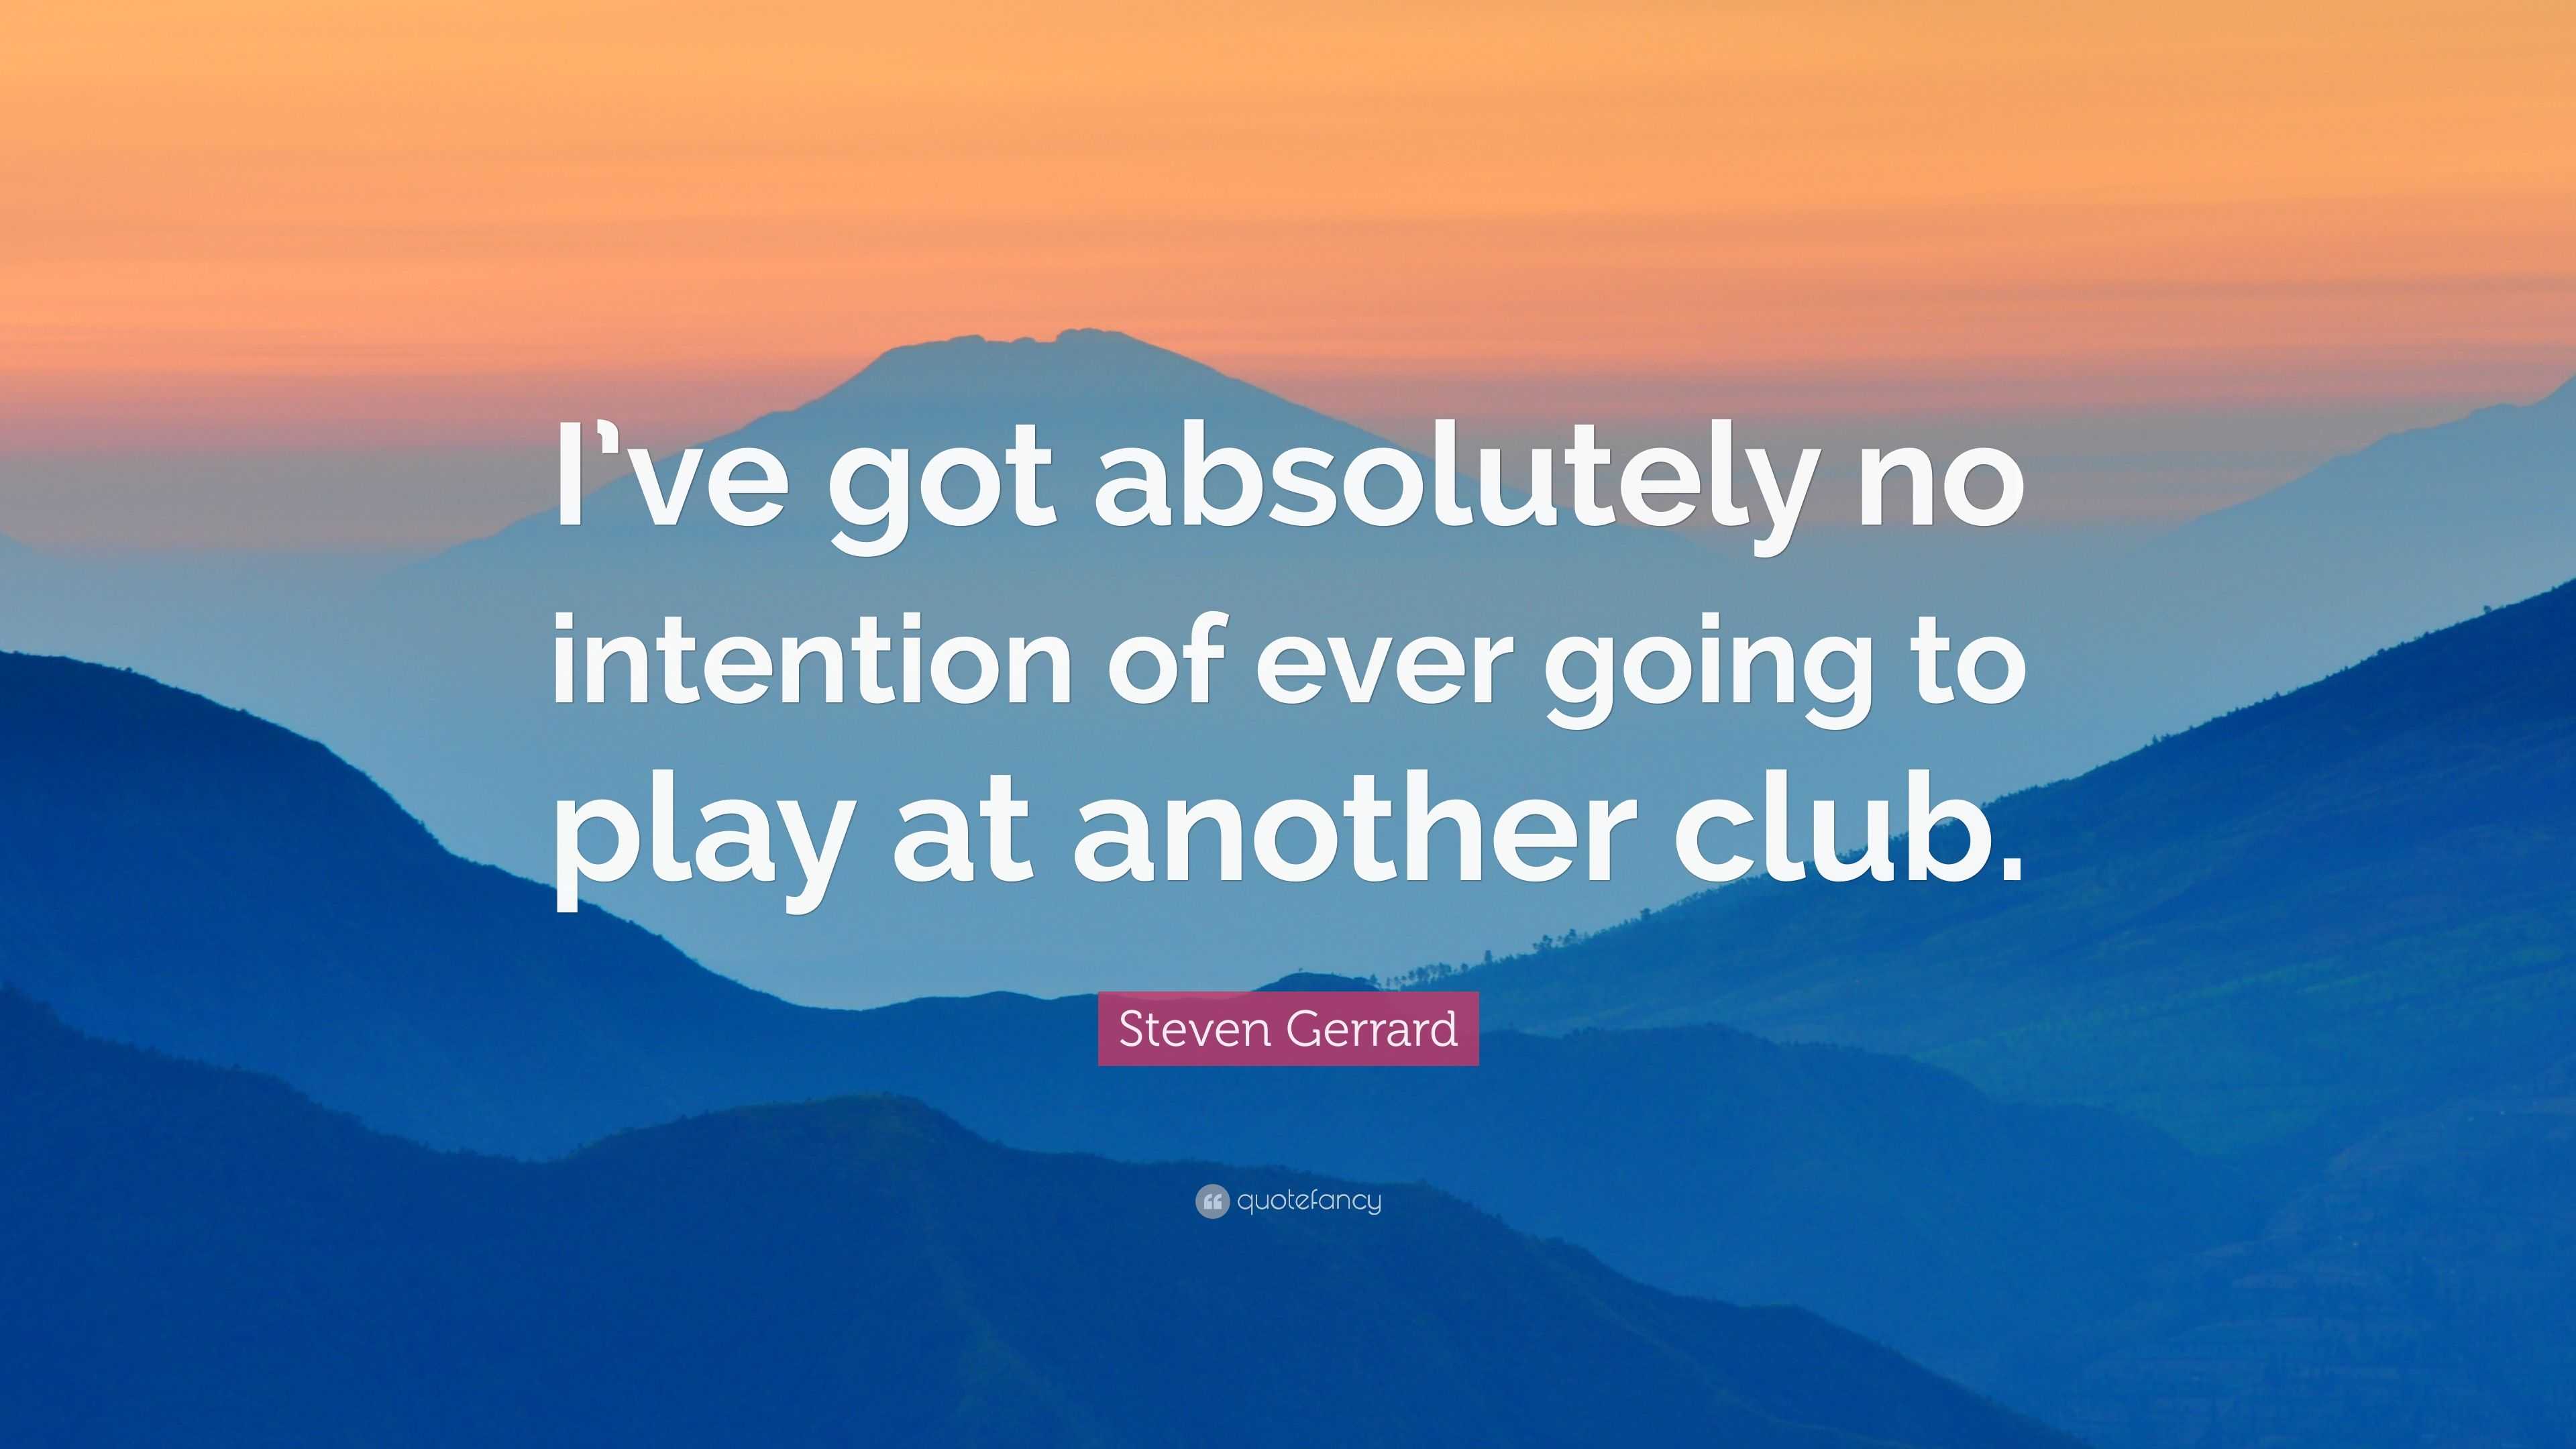 Steven Gerrard Quote: “I’ve got absolutely no intention of ever going ...